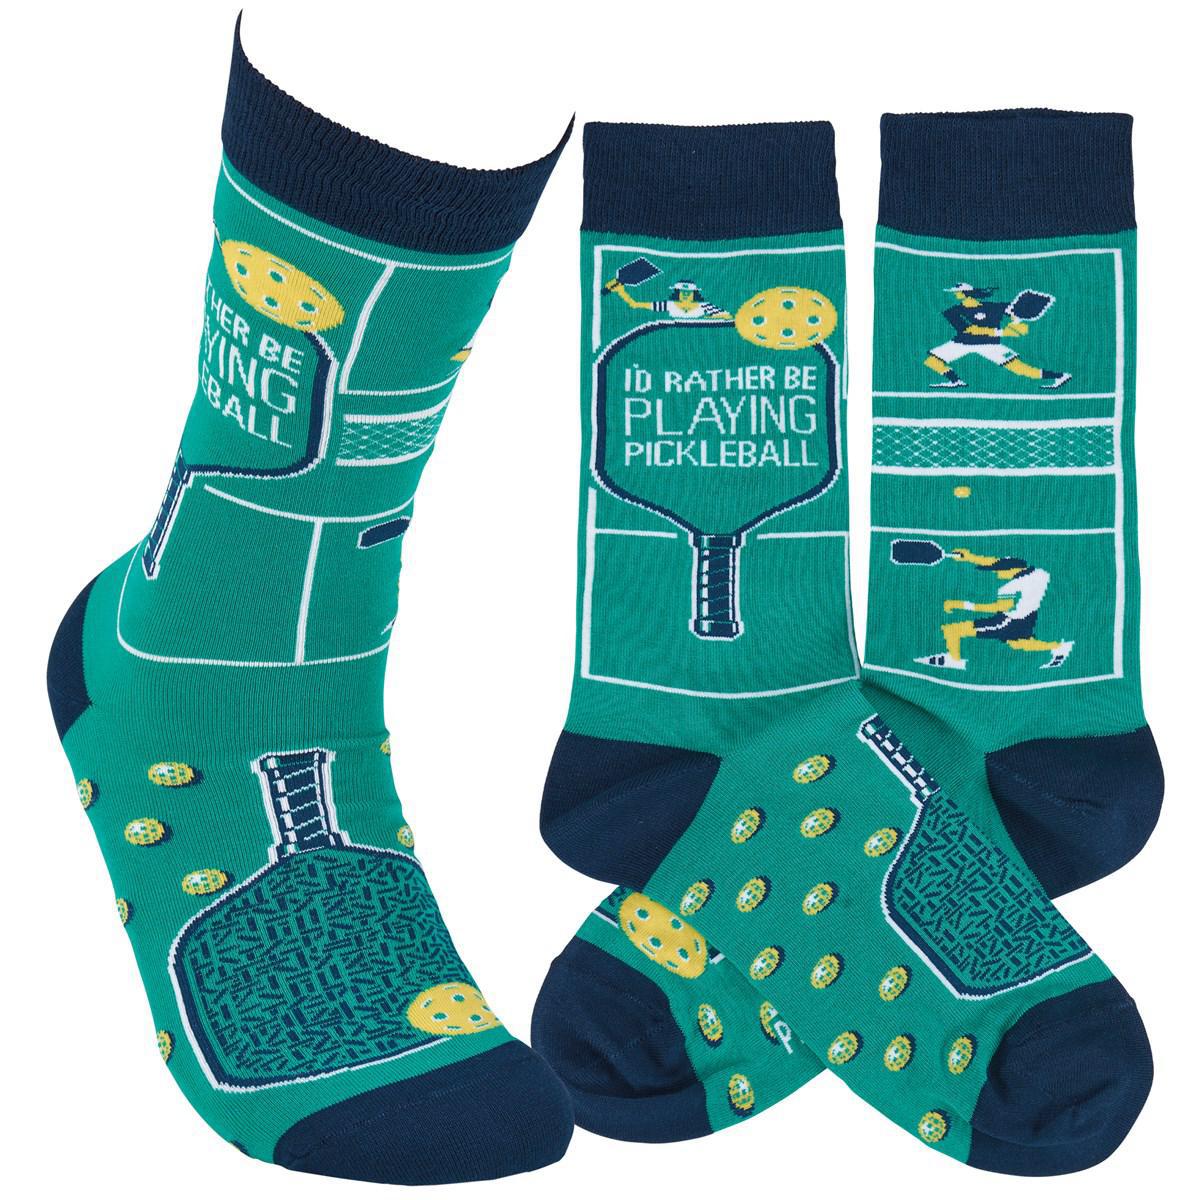 Rather Be Playing Pickleball Socks